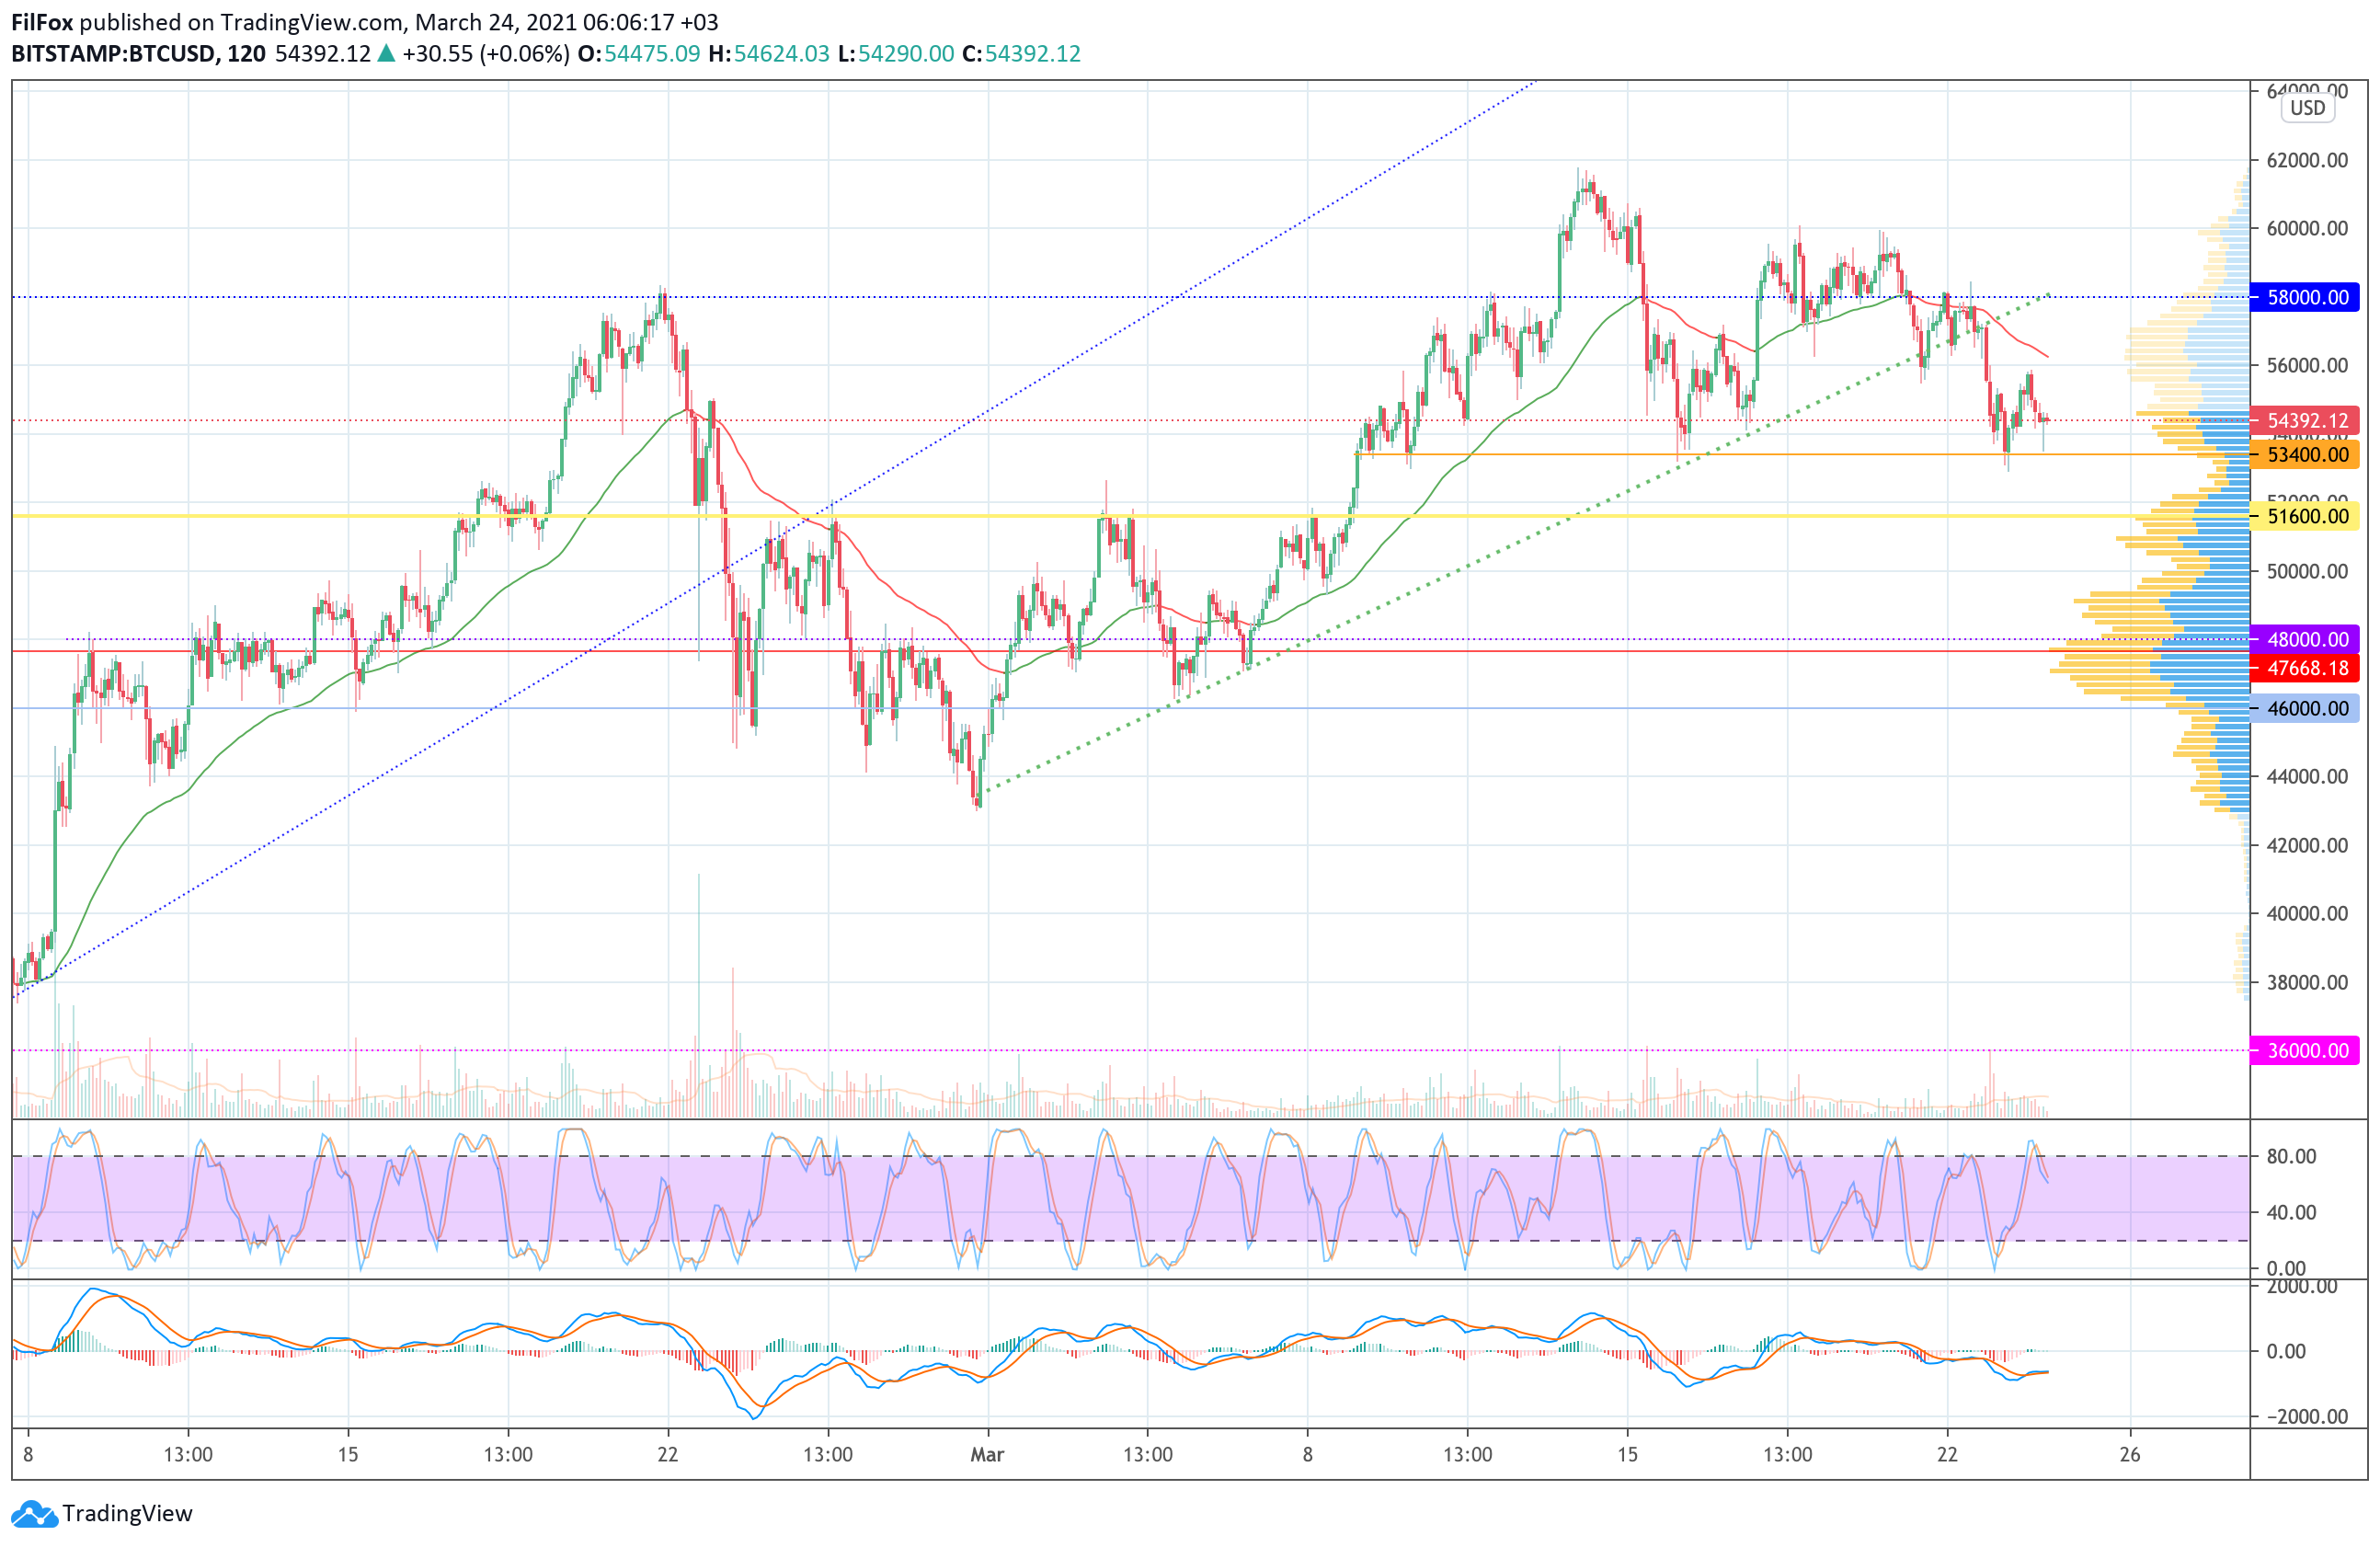 Analysis of prices for Bitcoin, Ethereum, XRP for 03/24/2021